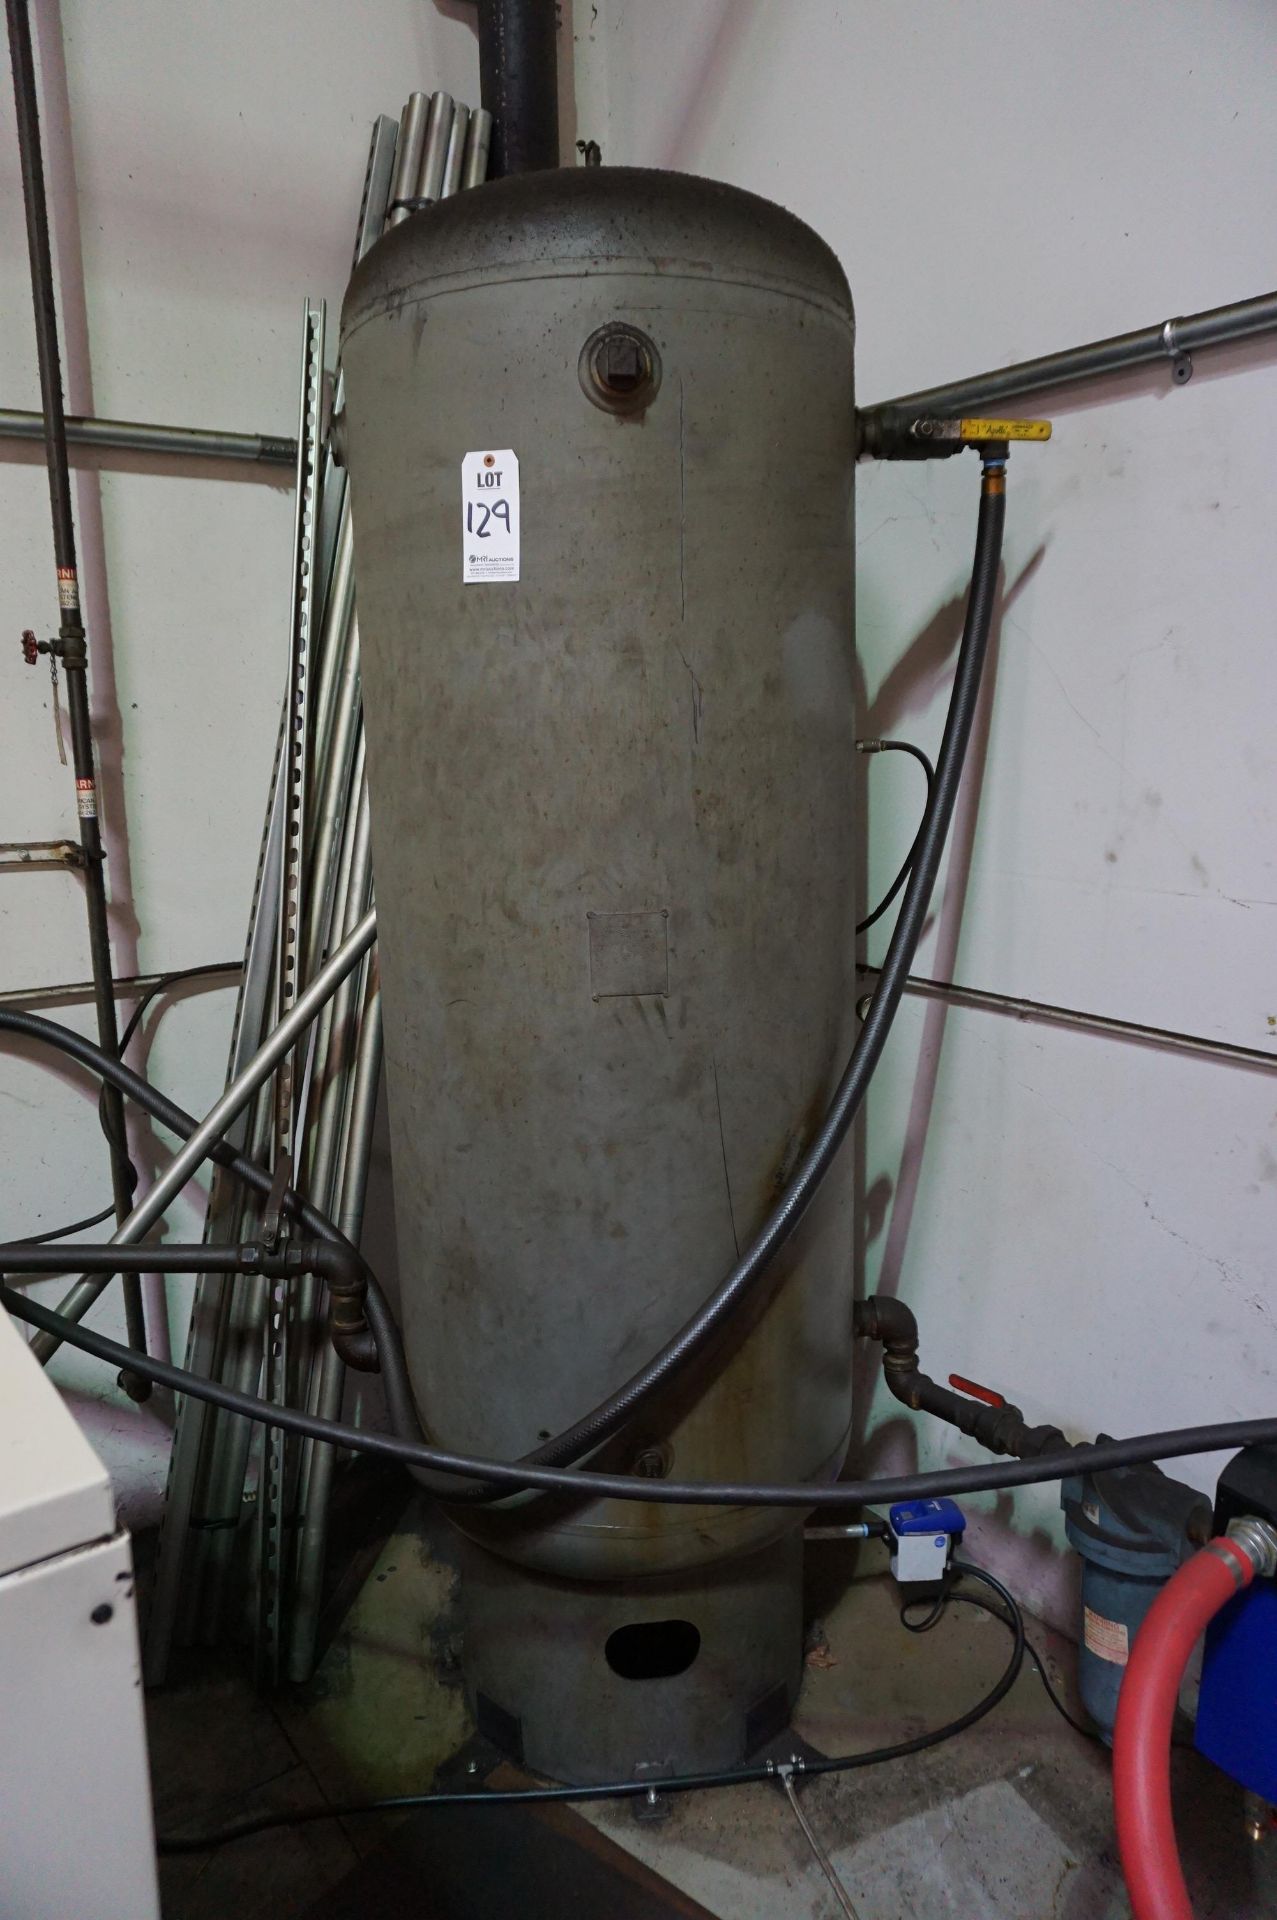 AIR TANK, APPROX 200 GAL, USED WITH AIR COMPRESSOR *LATE PICK UP**AIR COMPRESSOR NOT FOR SALE*